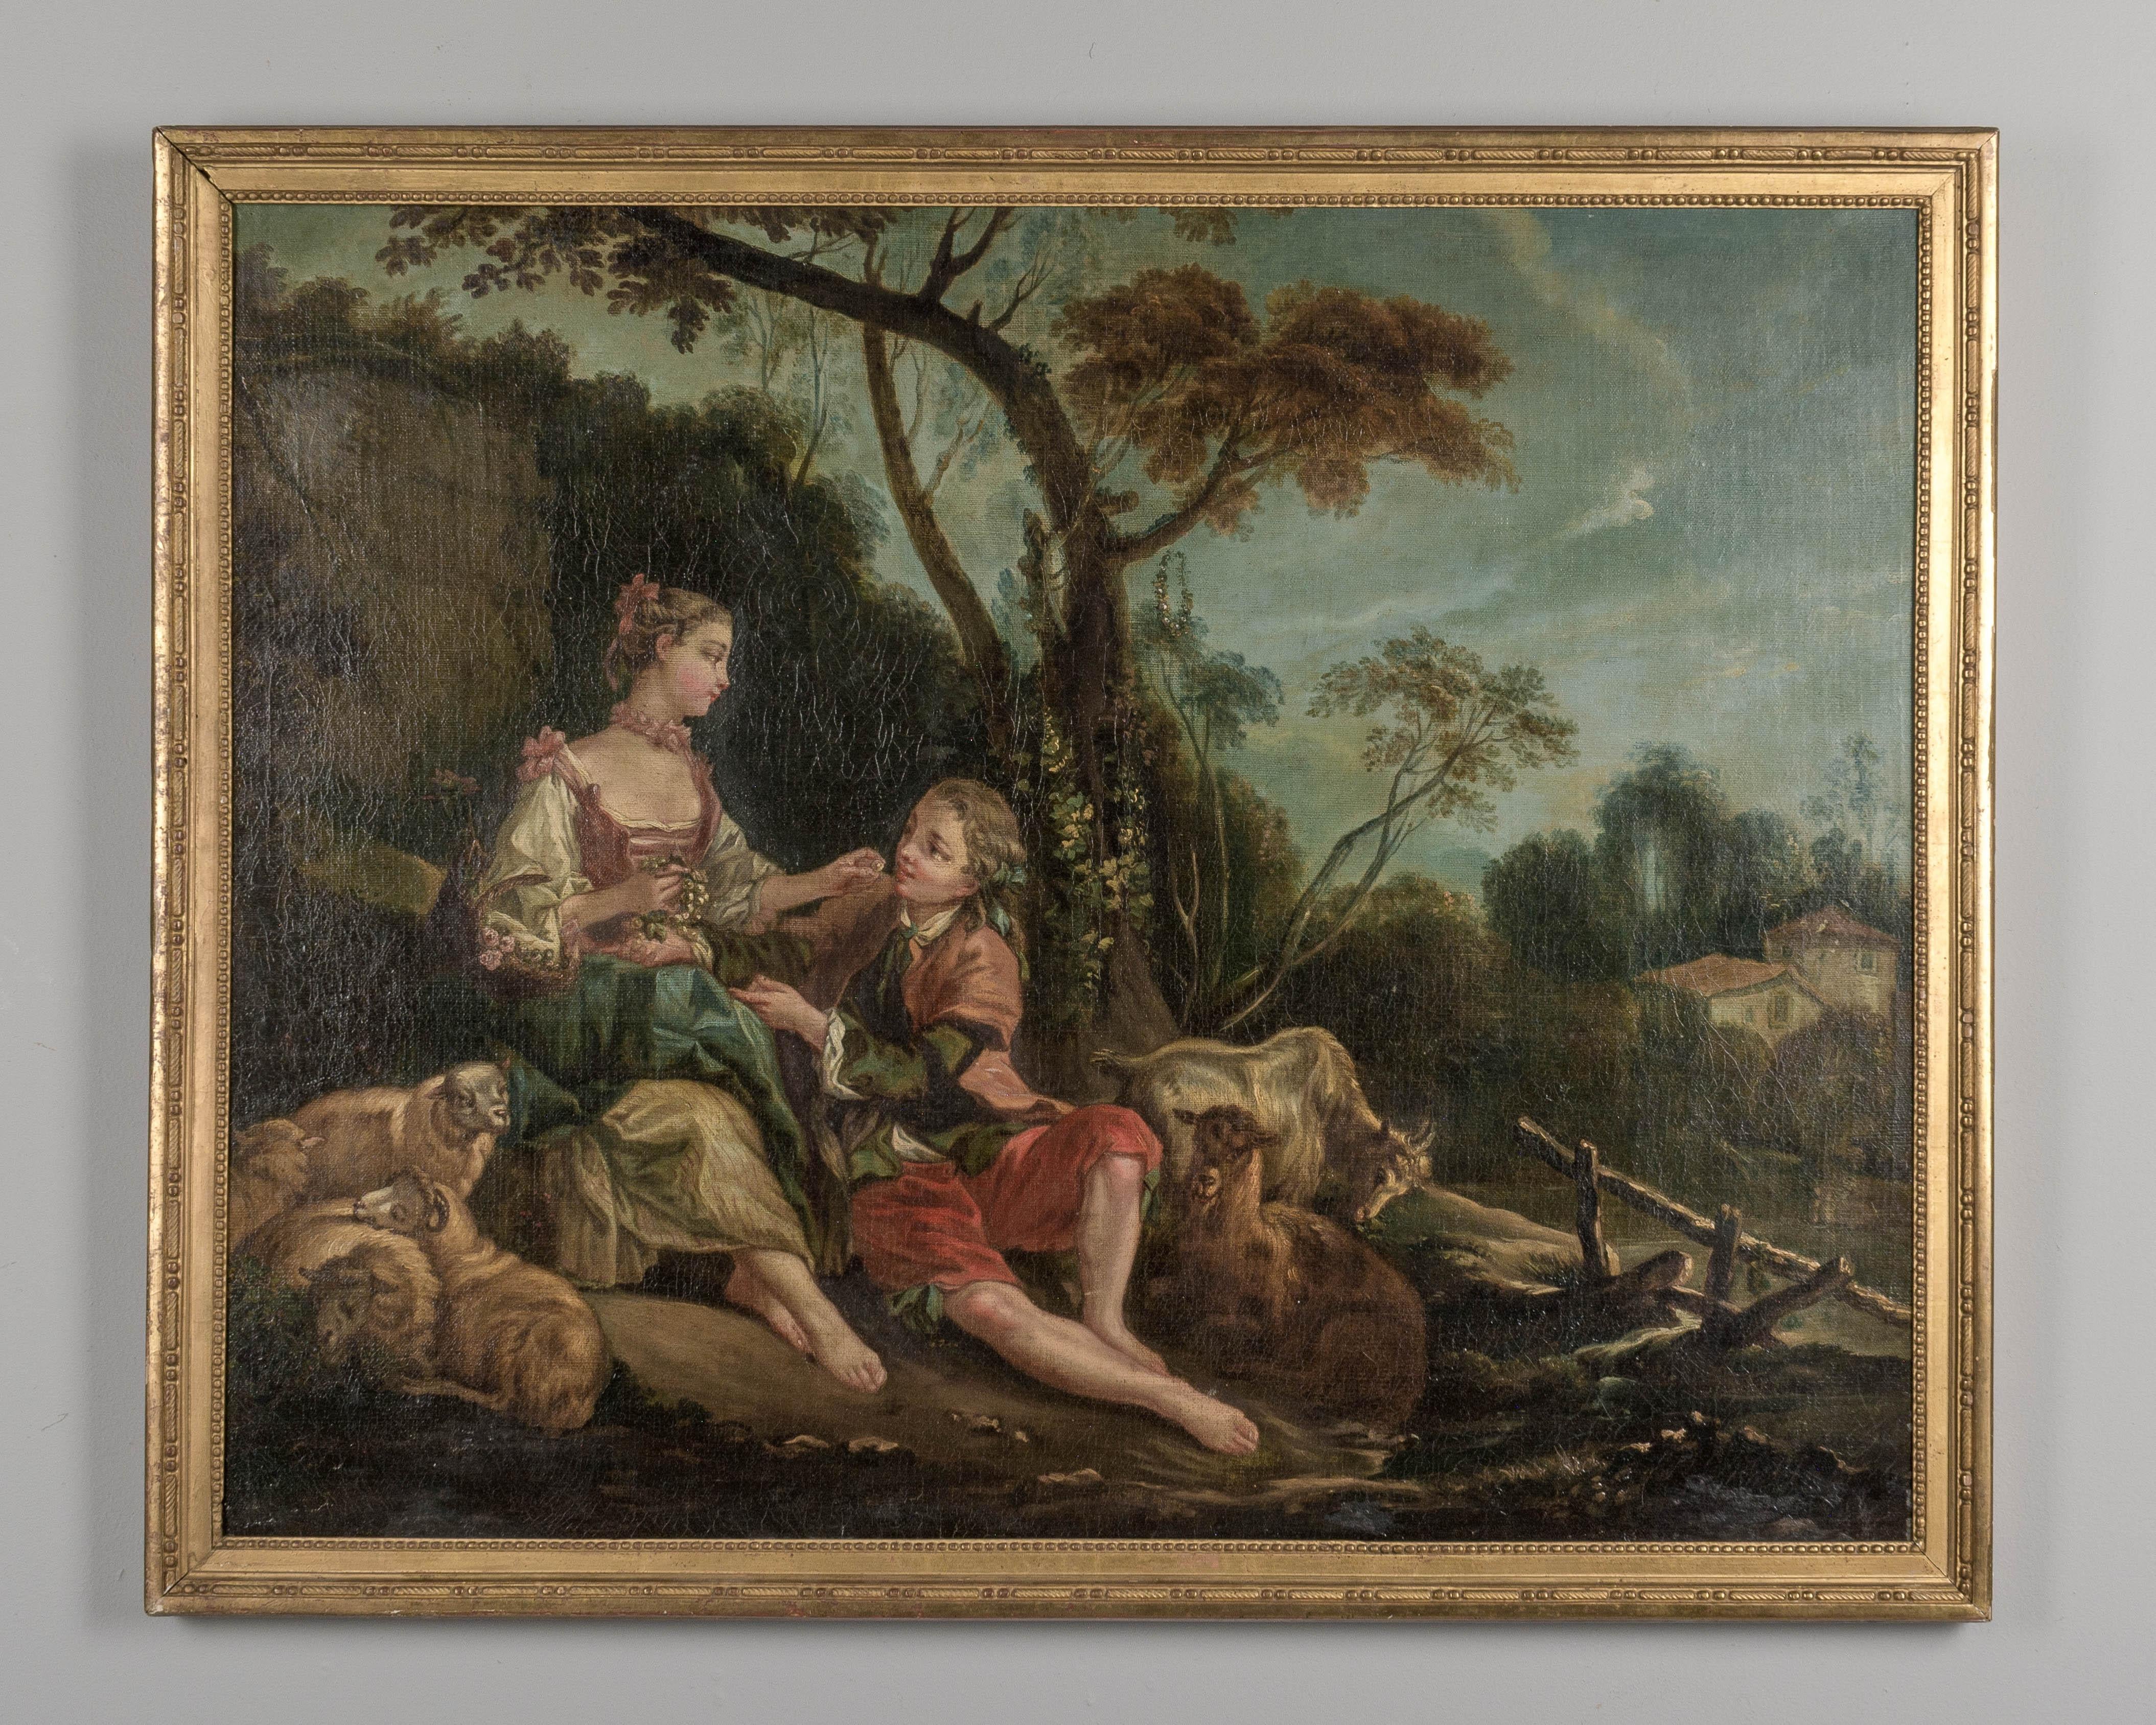 A late 18th century French painting depicting a romantic couple in a pastoral setting. Oil on canvas. Unsigned. Original gilded wood frame. Small repair to canvas in the upper left corner. Typical scene found in private homes and hotels in the 18th